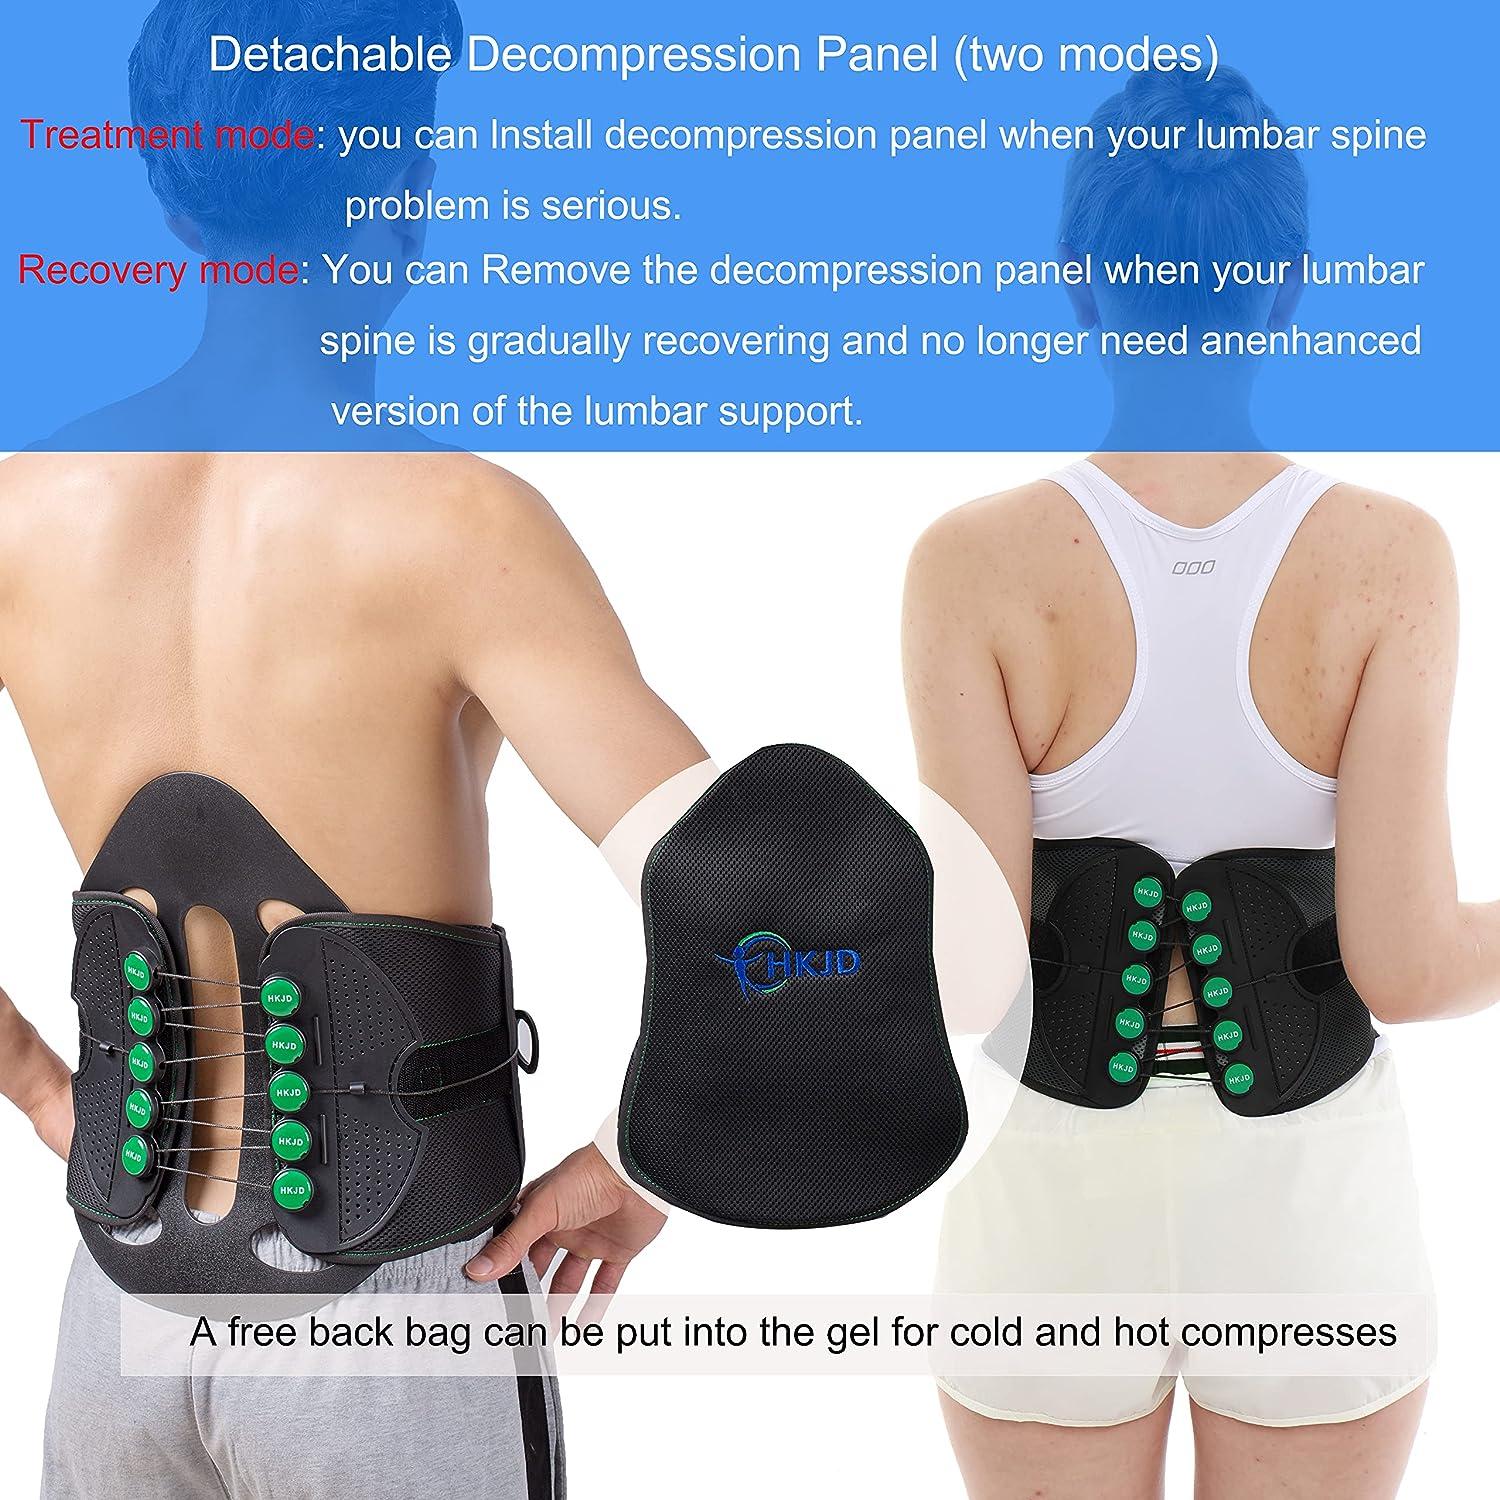  TODDOBRA TLSO Thoracic Full Back Brace for Men and Women -  Universal Treat Kyphosis, Compression Fractures, Osteoporosis, Upper Spine  Injuries, and Pre or Post Surgery with Hard Lumbar Support : Health